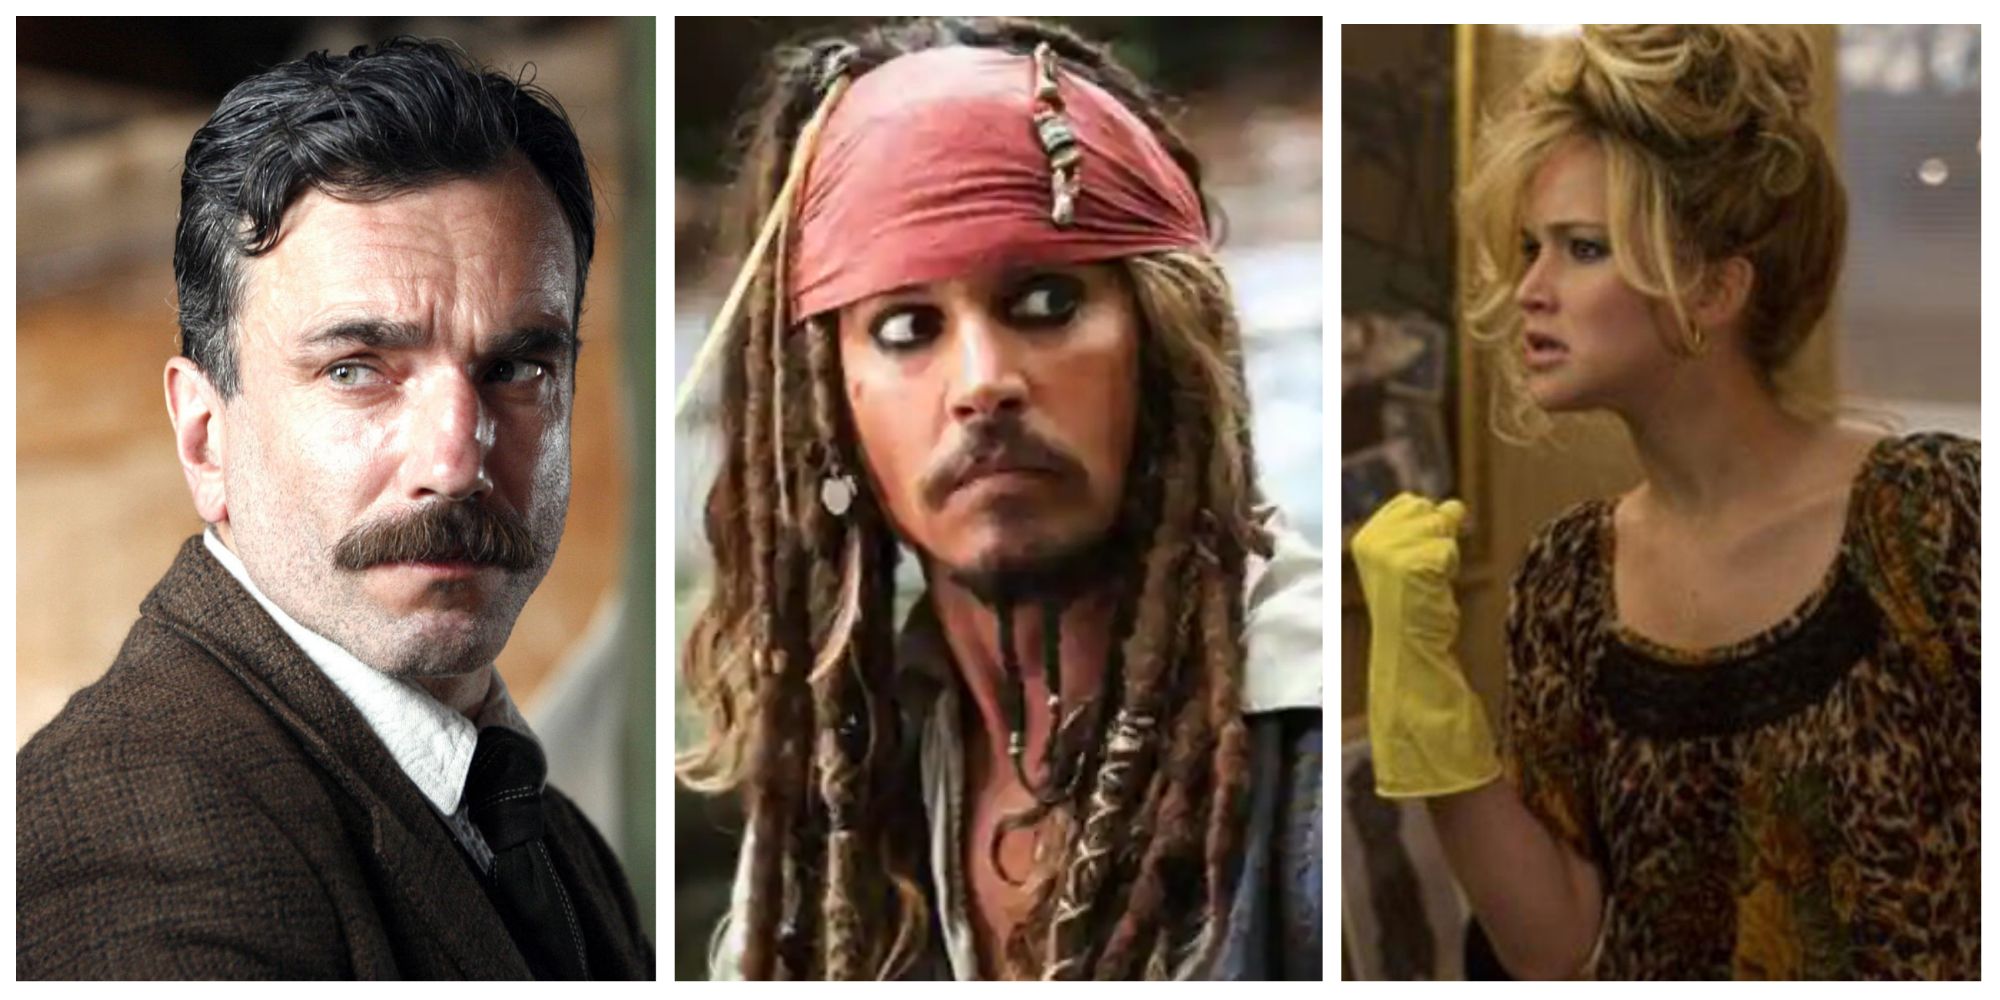 Collage of daniel day lewis, johnny depp, and jennifer lawrence